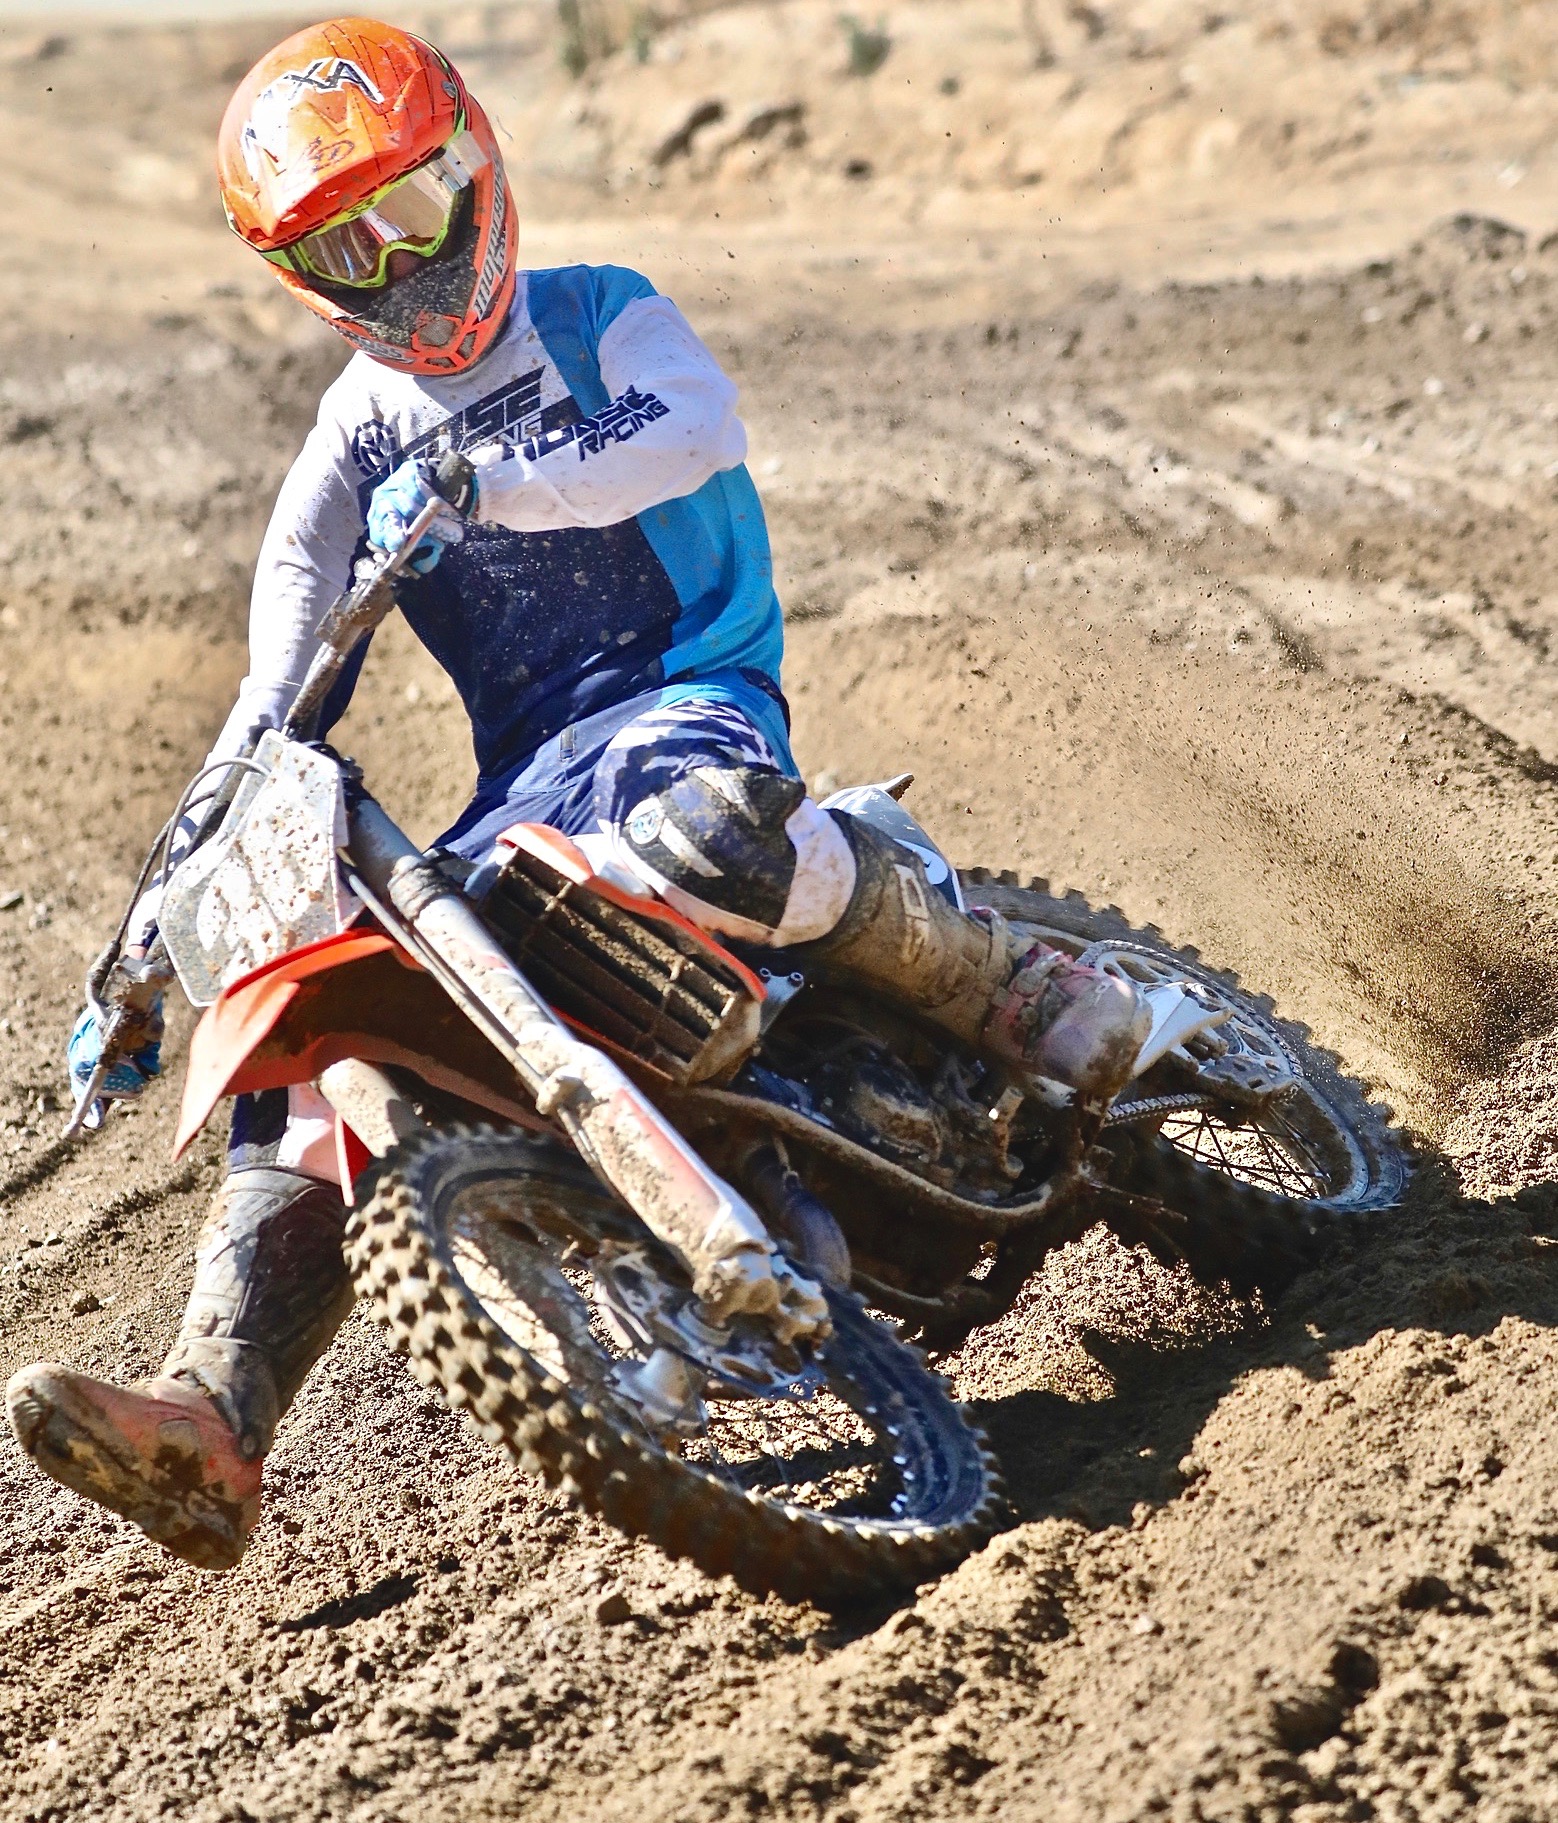 ClubMoto – Keeping Kids on the Right Track